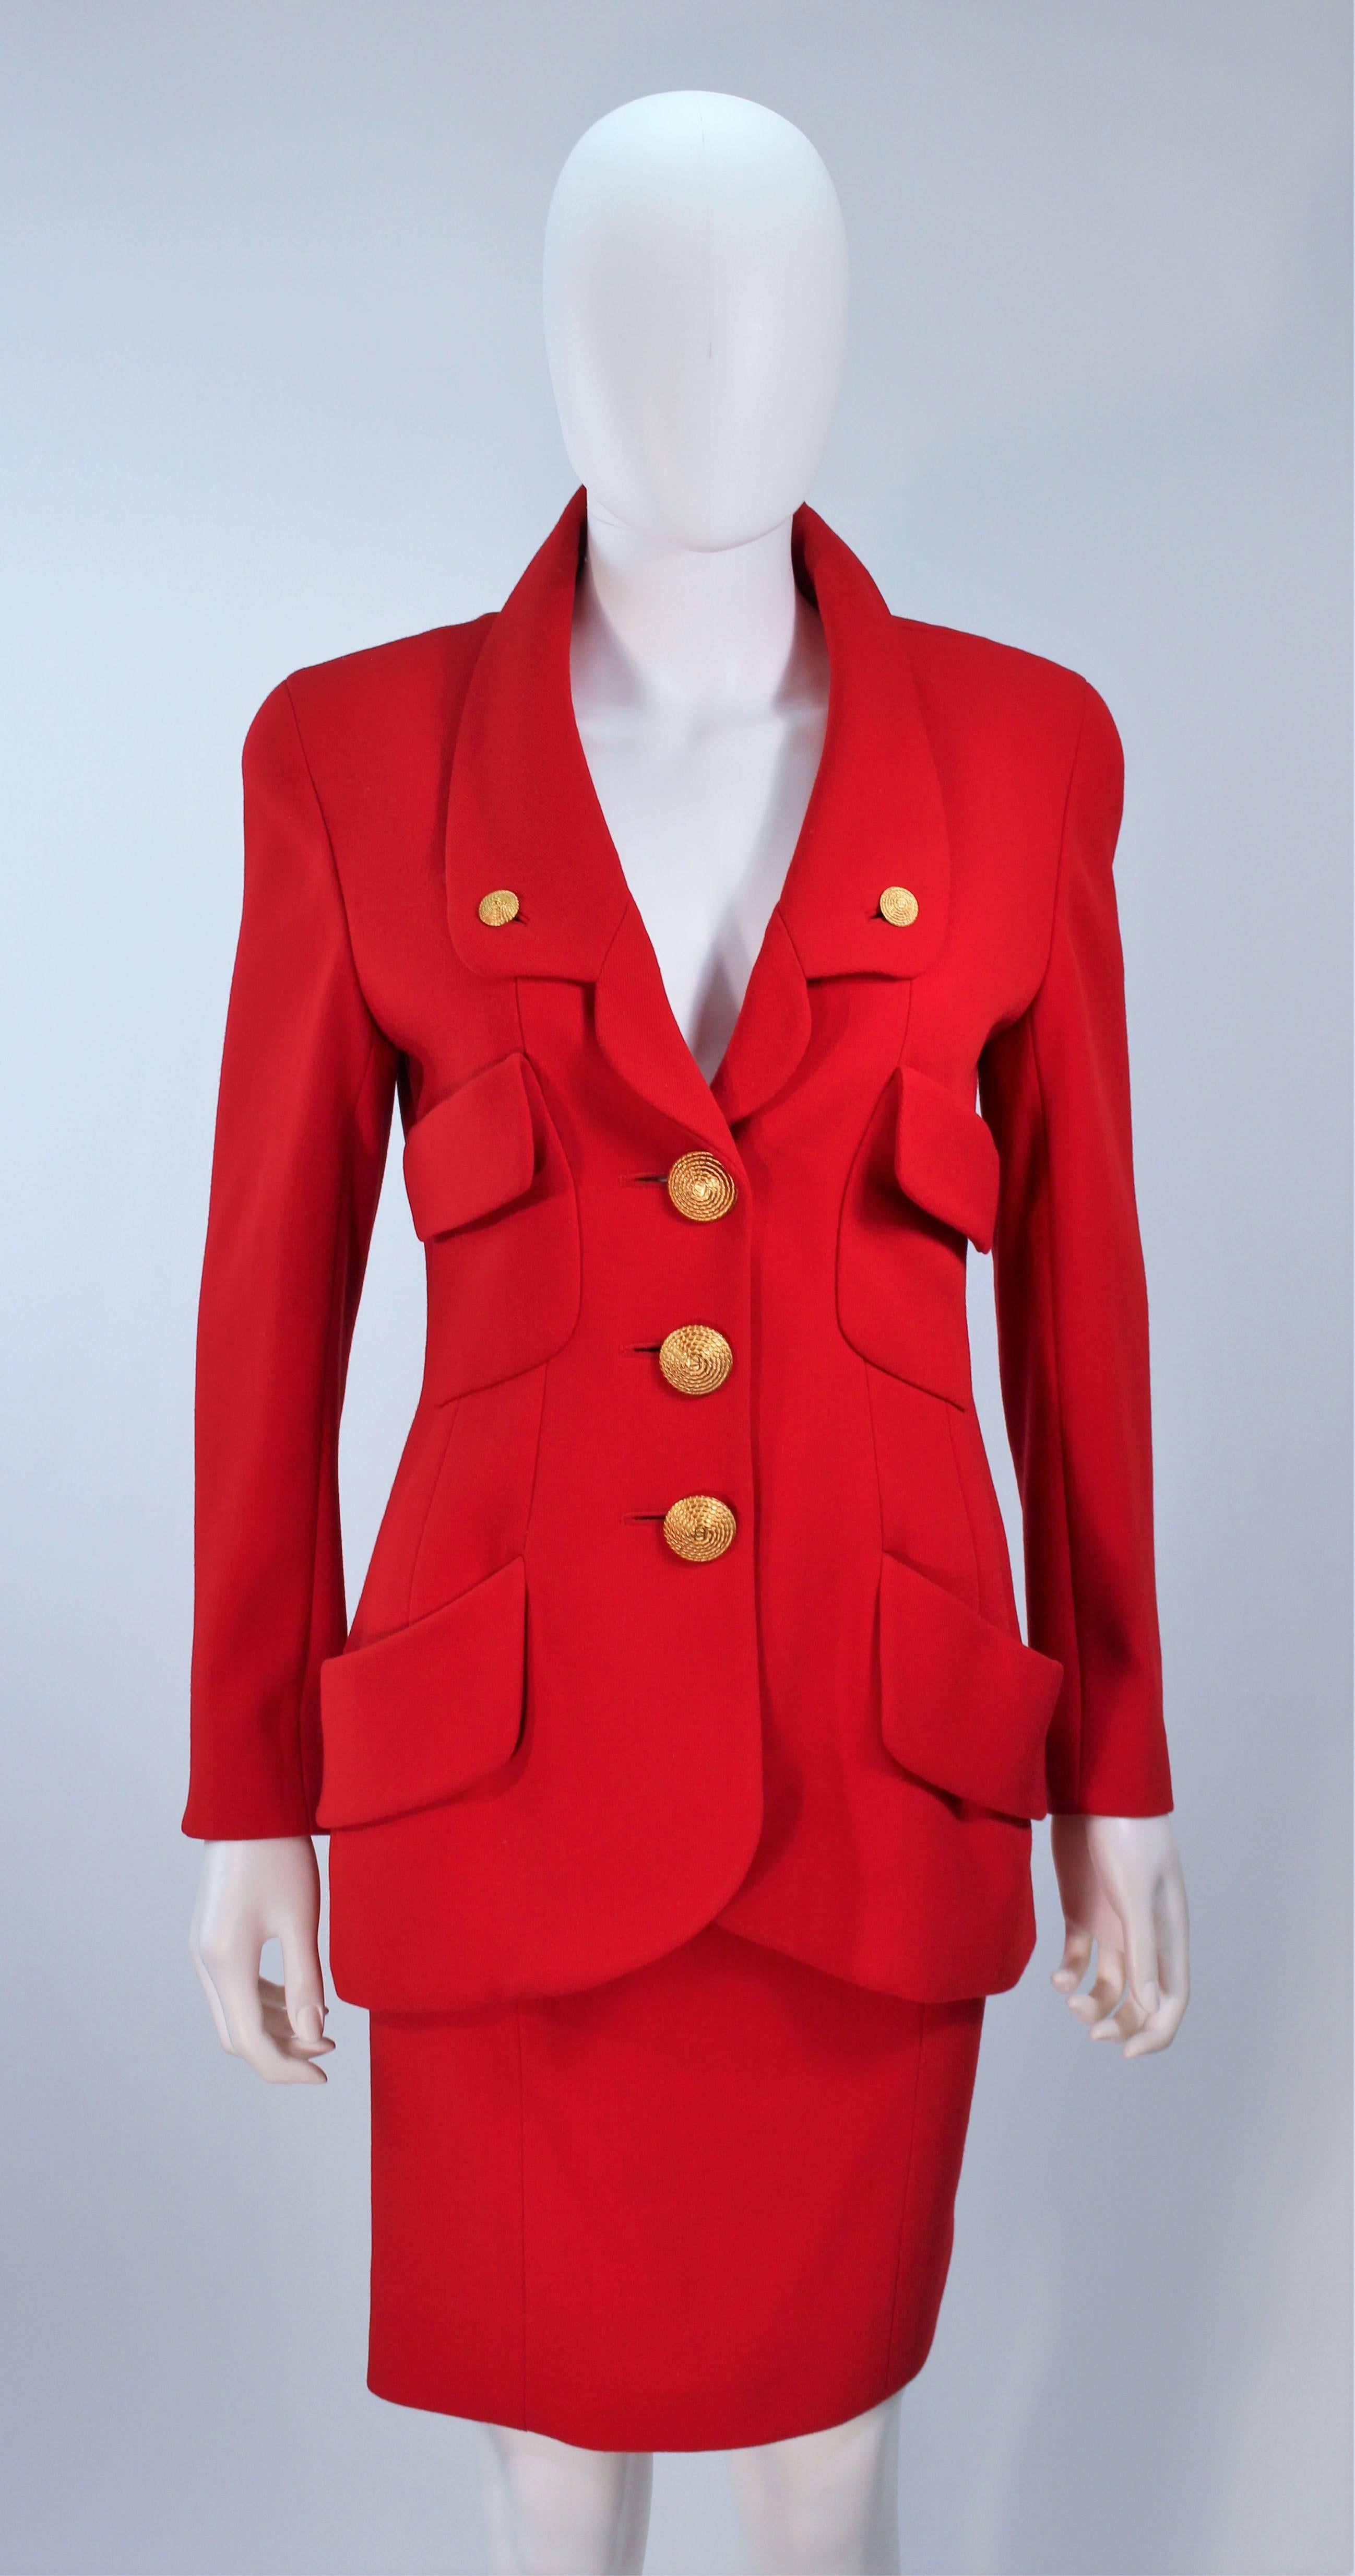  This Chanel skirt suit is composed of a red wool with braided-textured gold 'CC' logo  buttons as well as a silk lining. The jacket features center front button closures and a safari style. The classic pencil style skirt features a zipper closure.